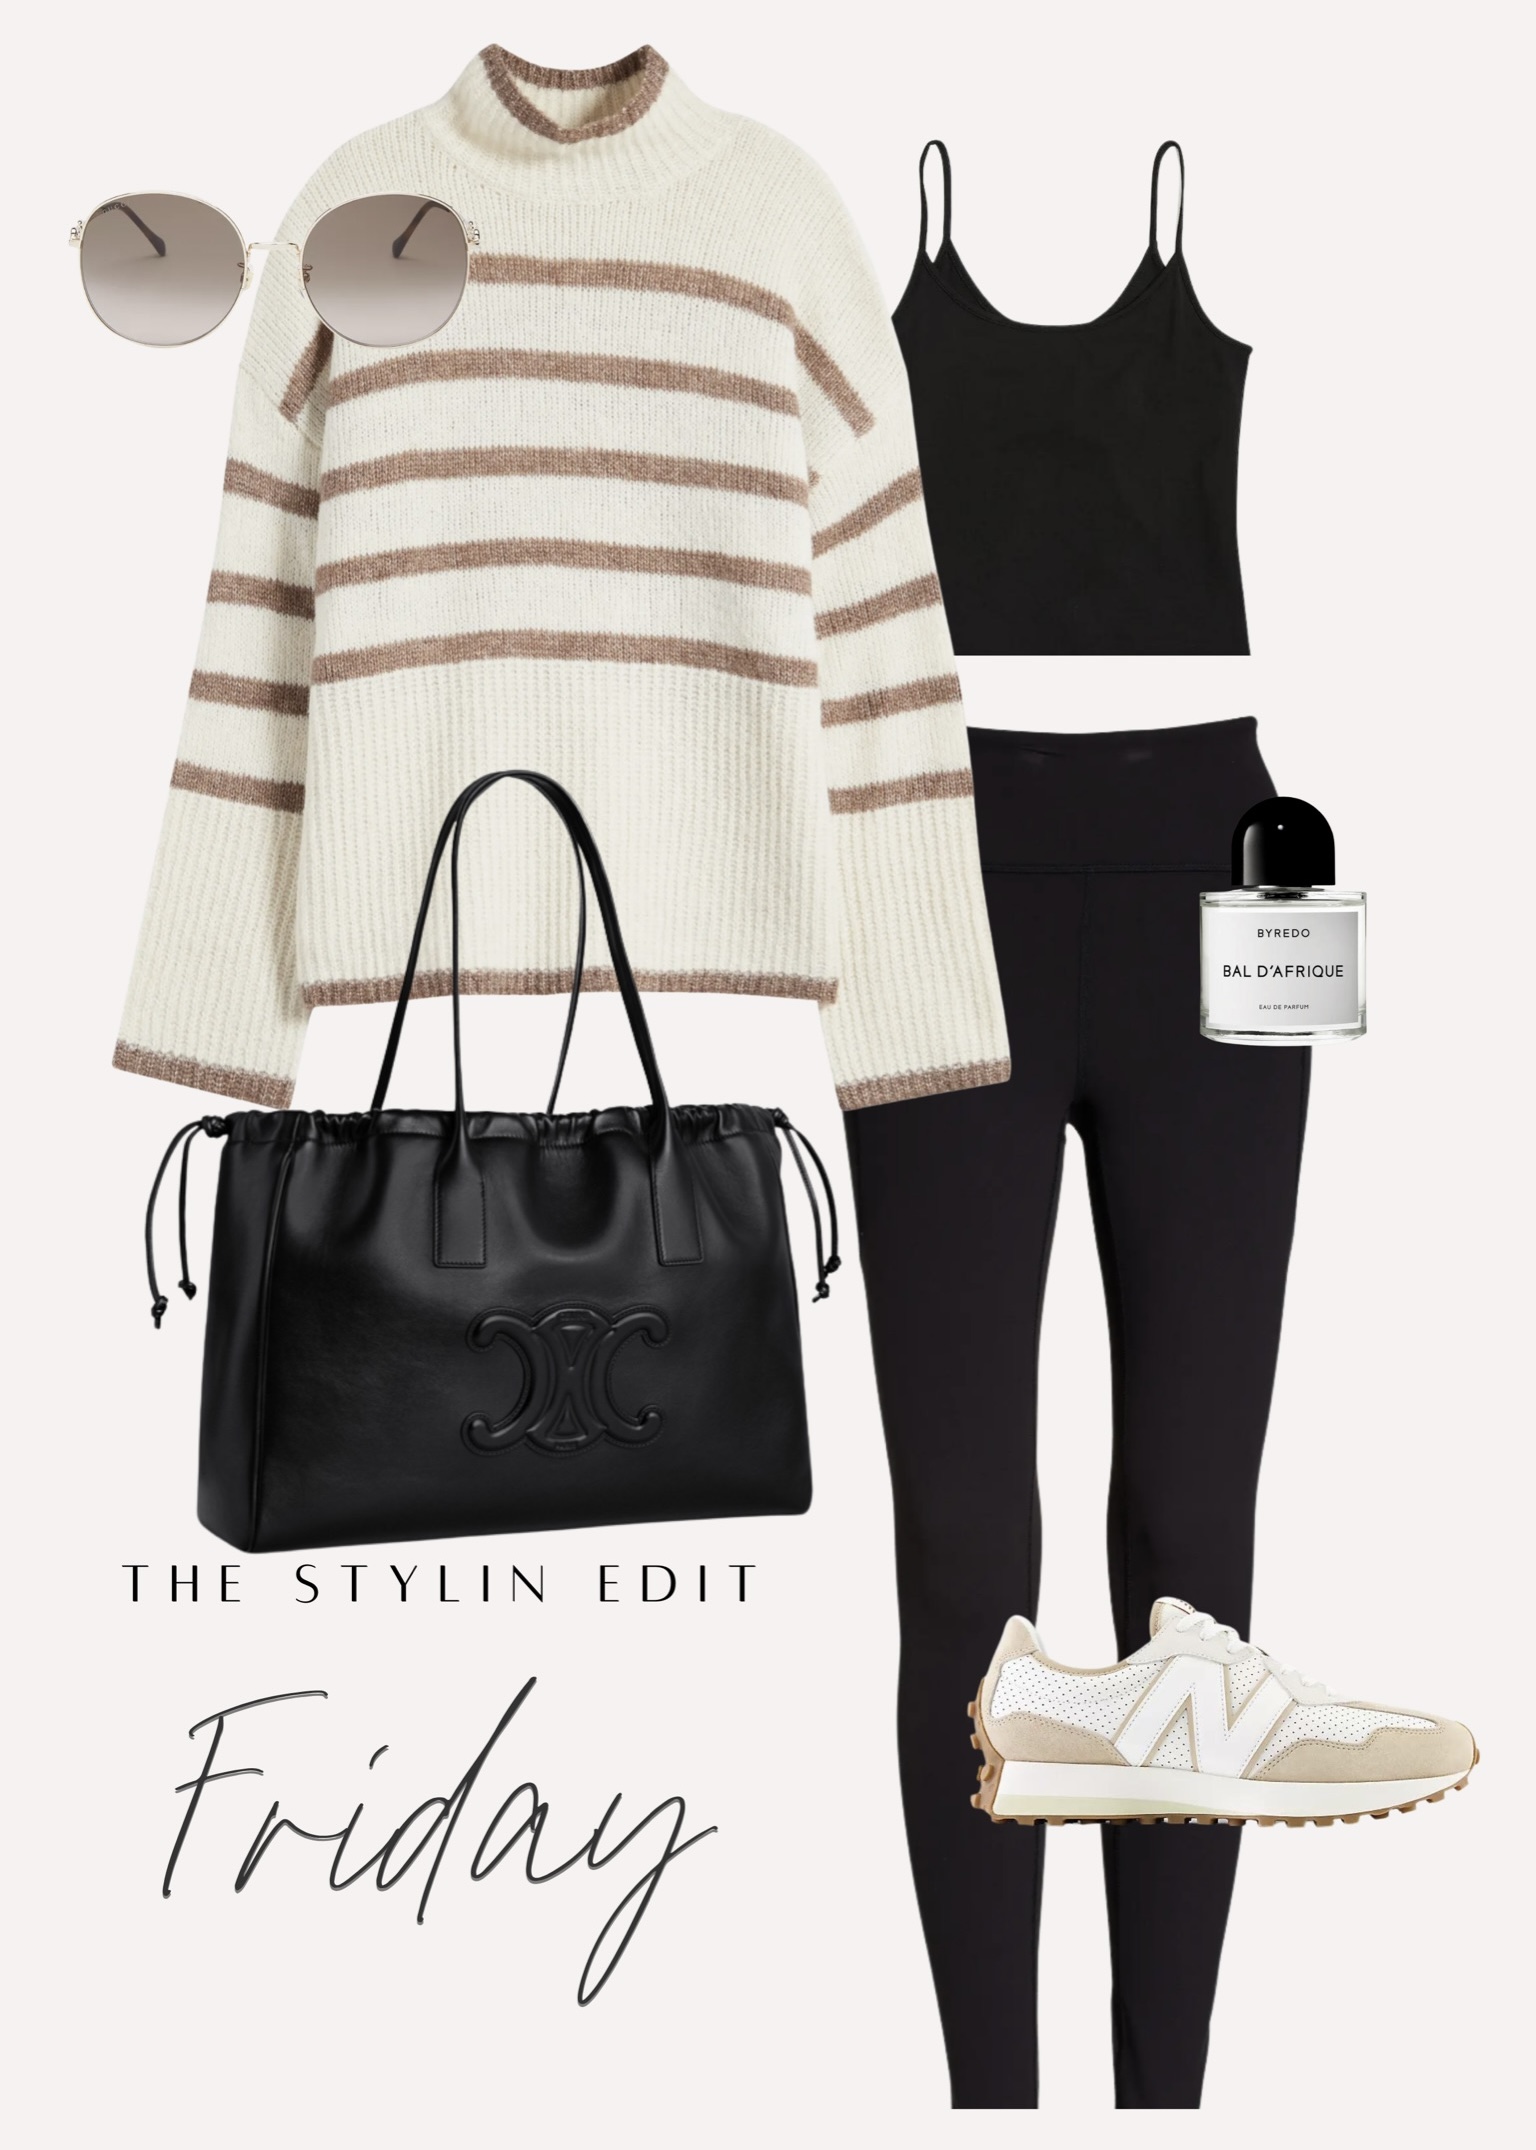 OUTFITS OF THE WEEK 10/1 - Stylin by Aylin